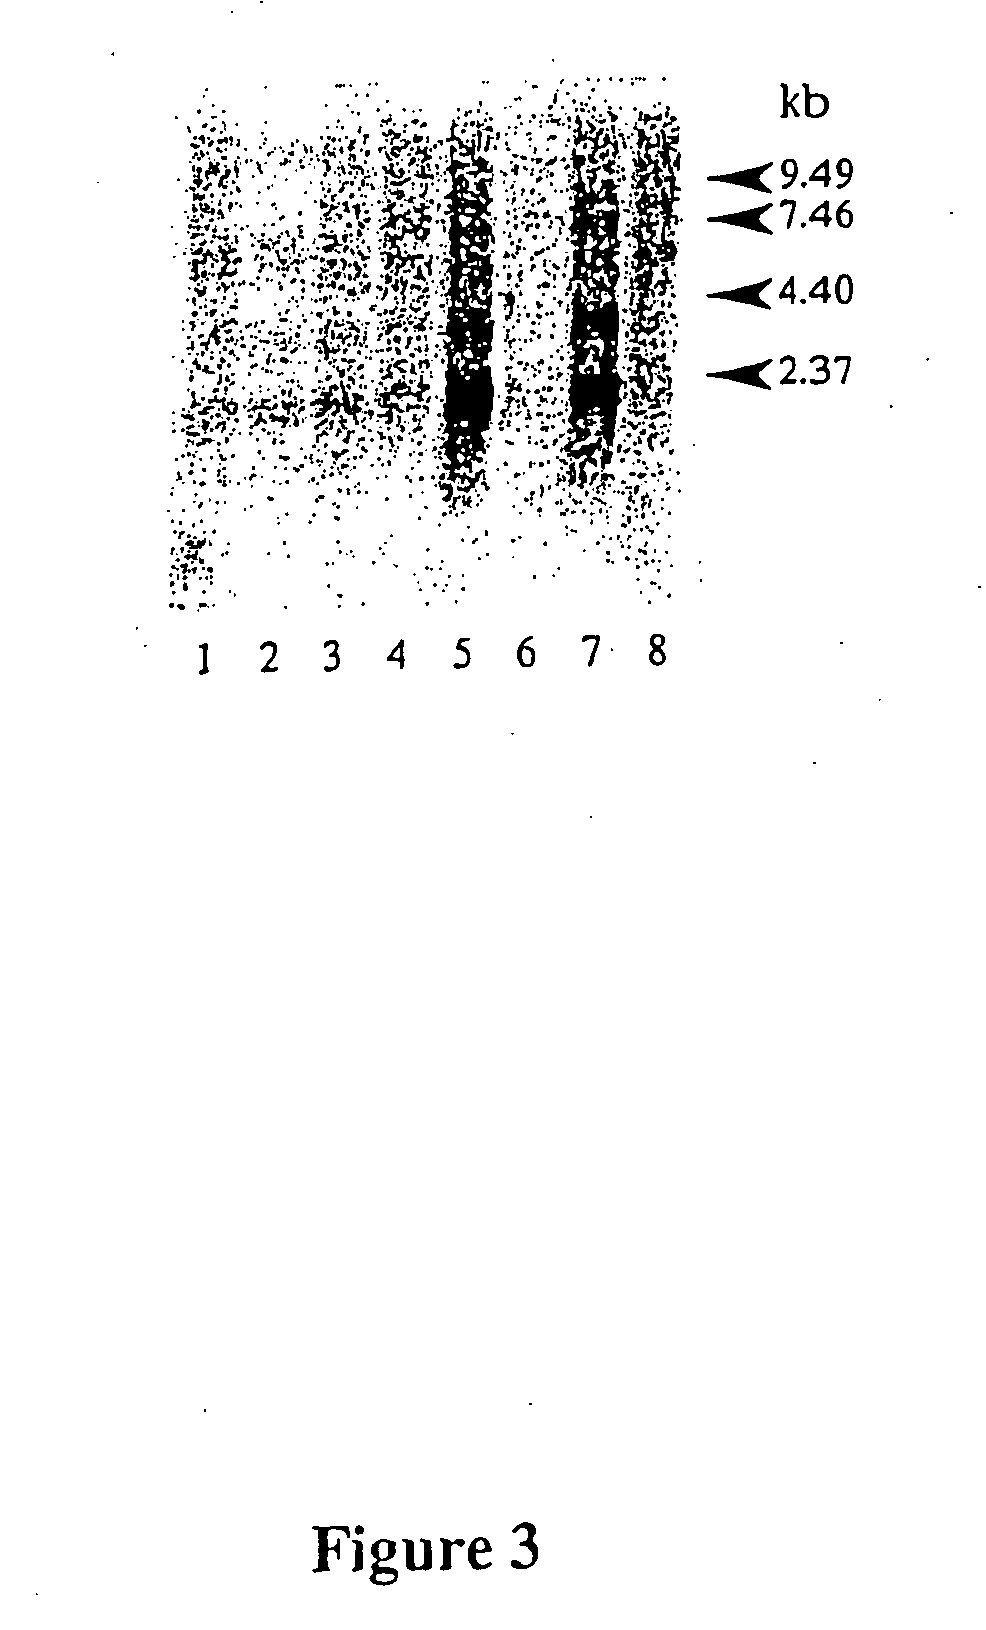 Compositions and methods for viral resistance genes